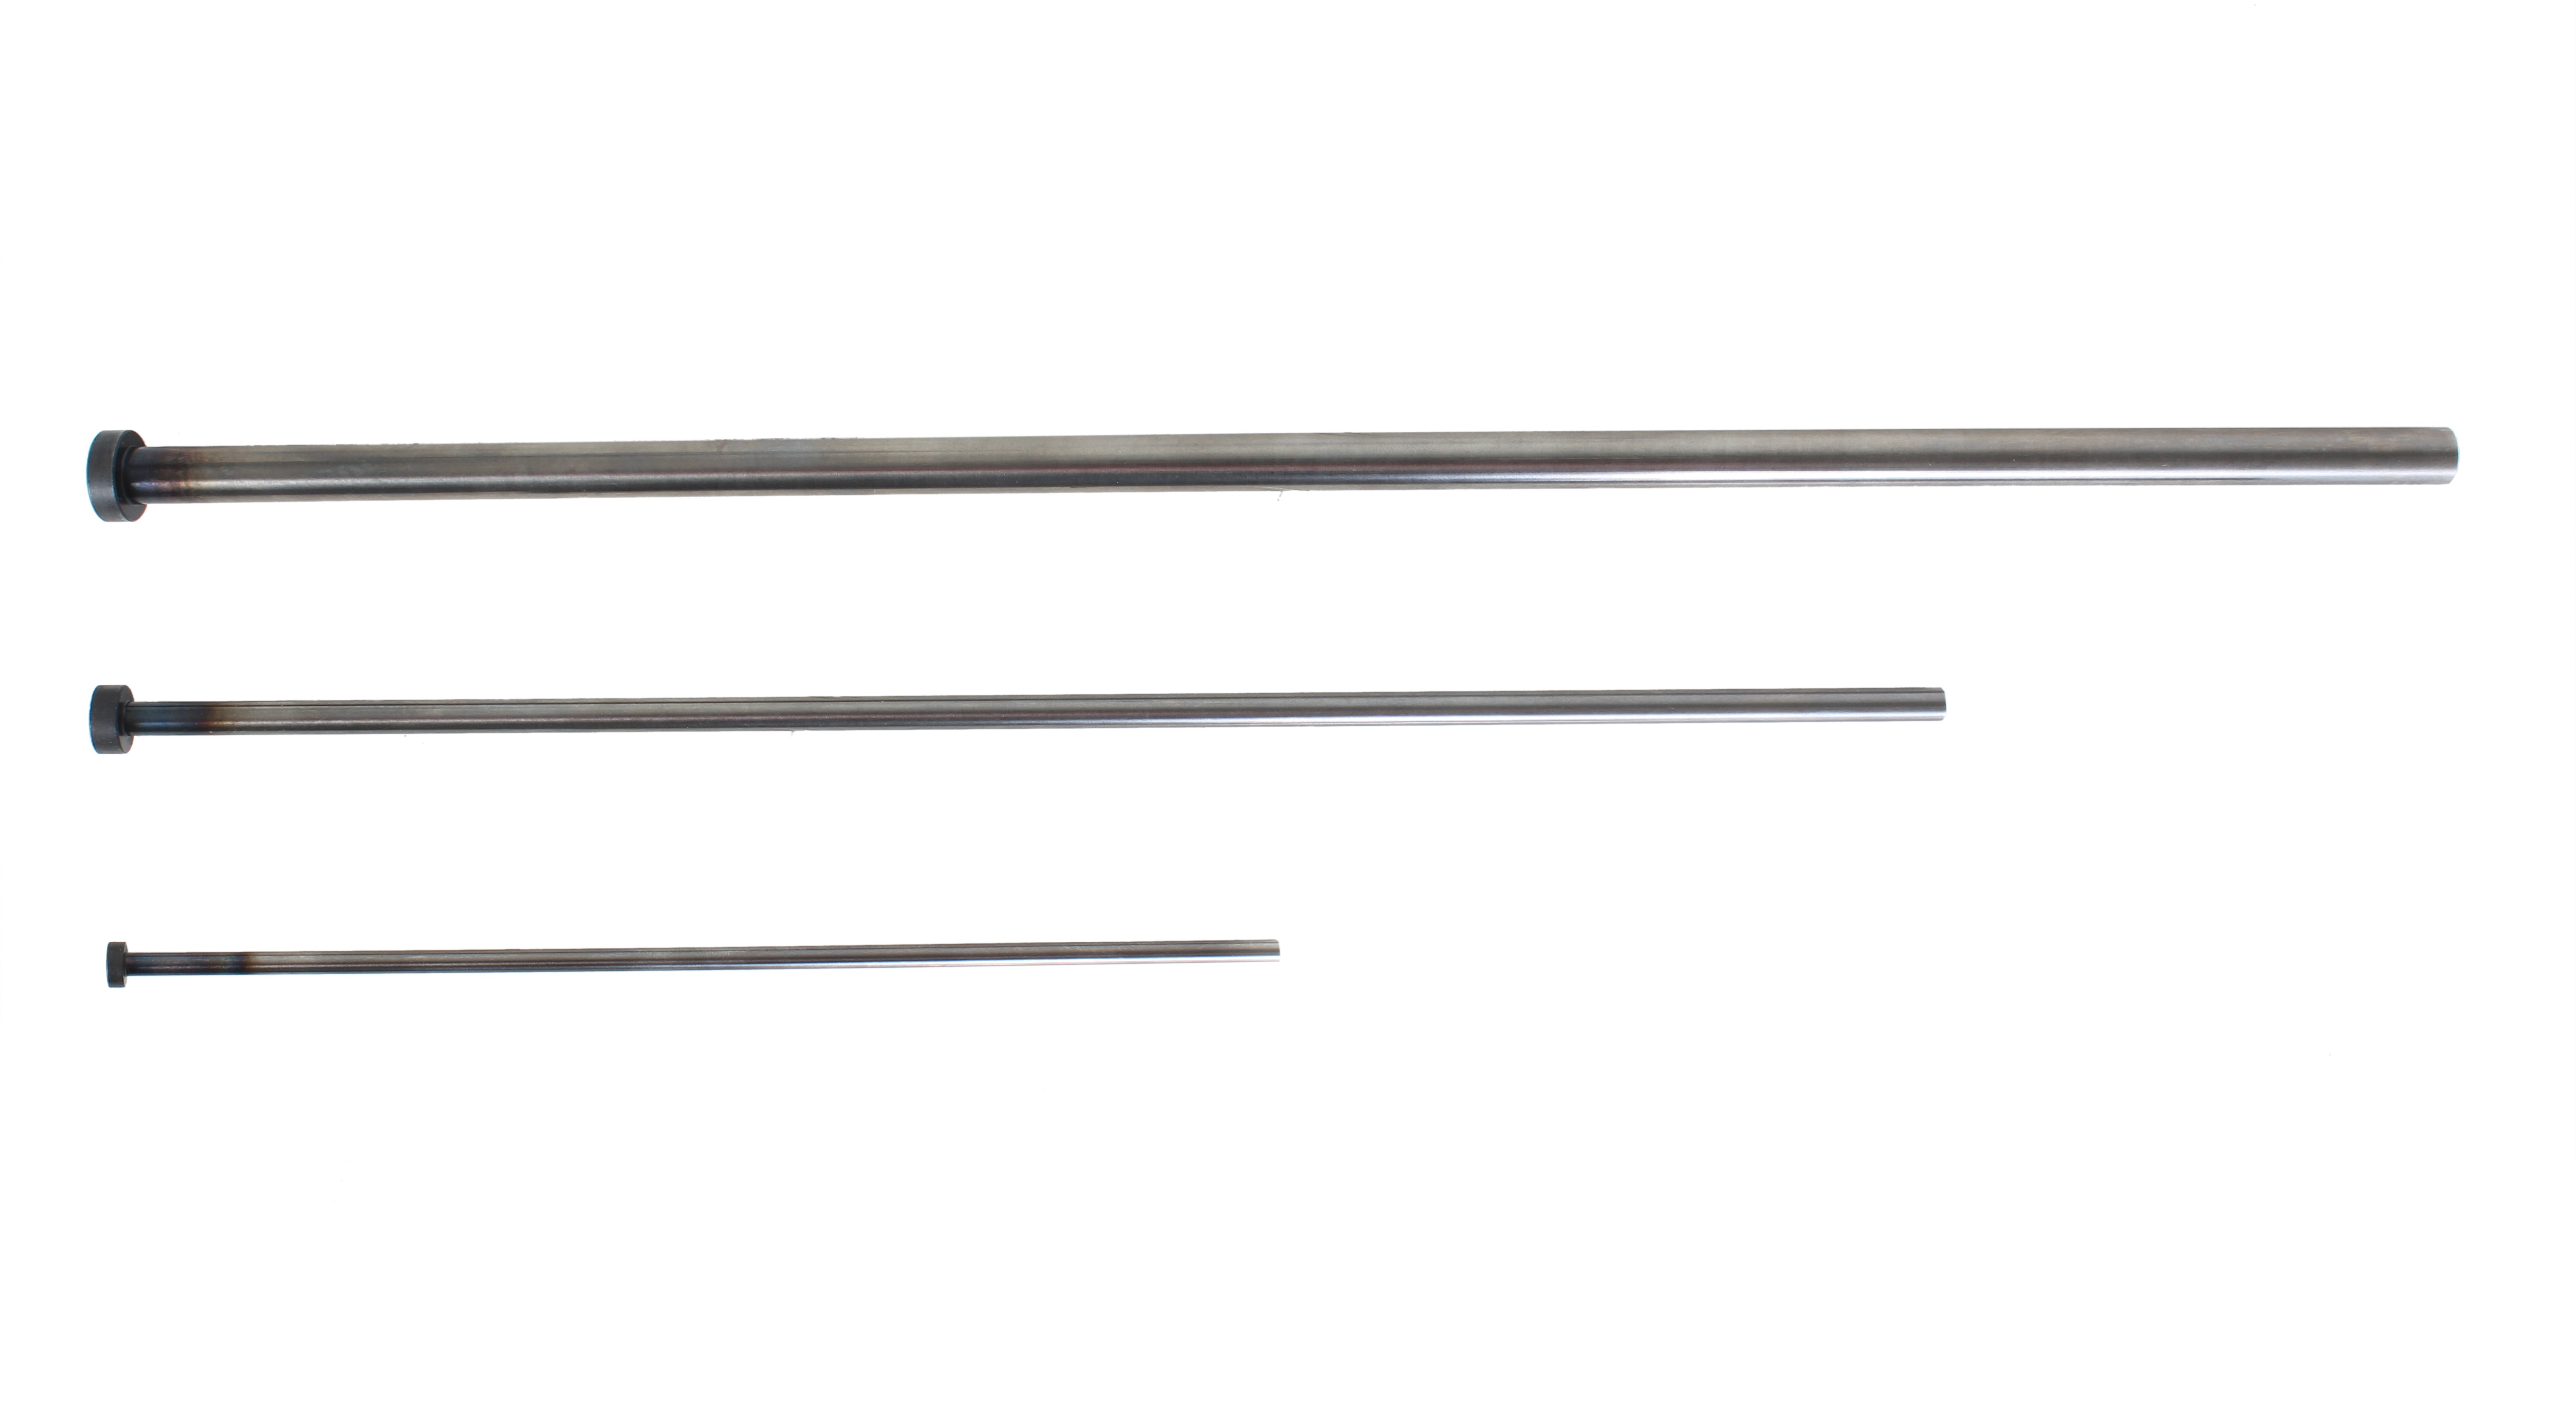 STRAIGHT EJECTOR PINS -DIN Type/SKD61 equivalent+Nitrided/Standard- (D-EPN12-125) 